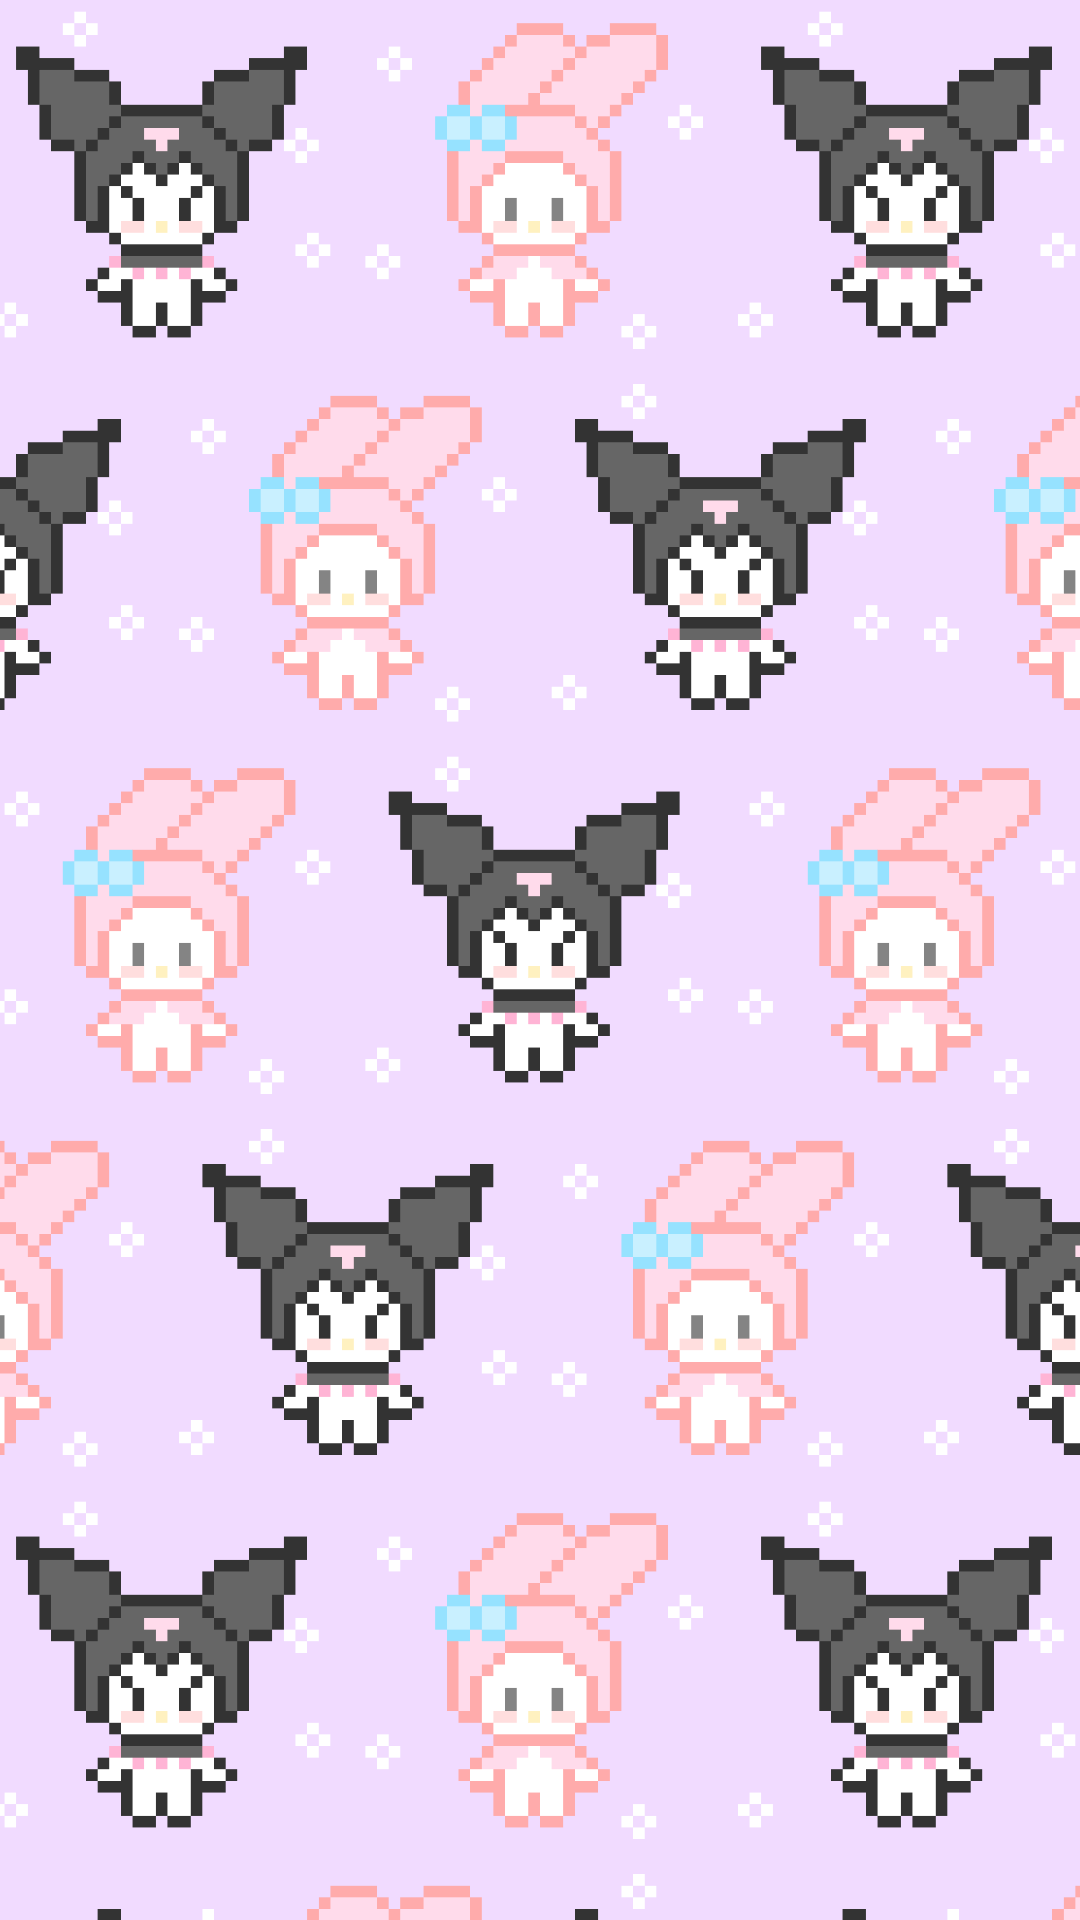 A pattern of pixelated cat and dog characters - Kuromi